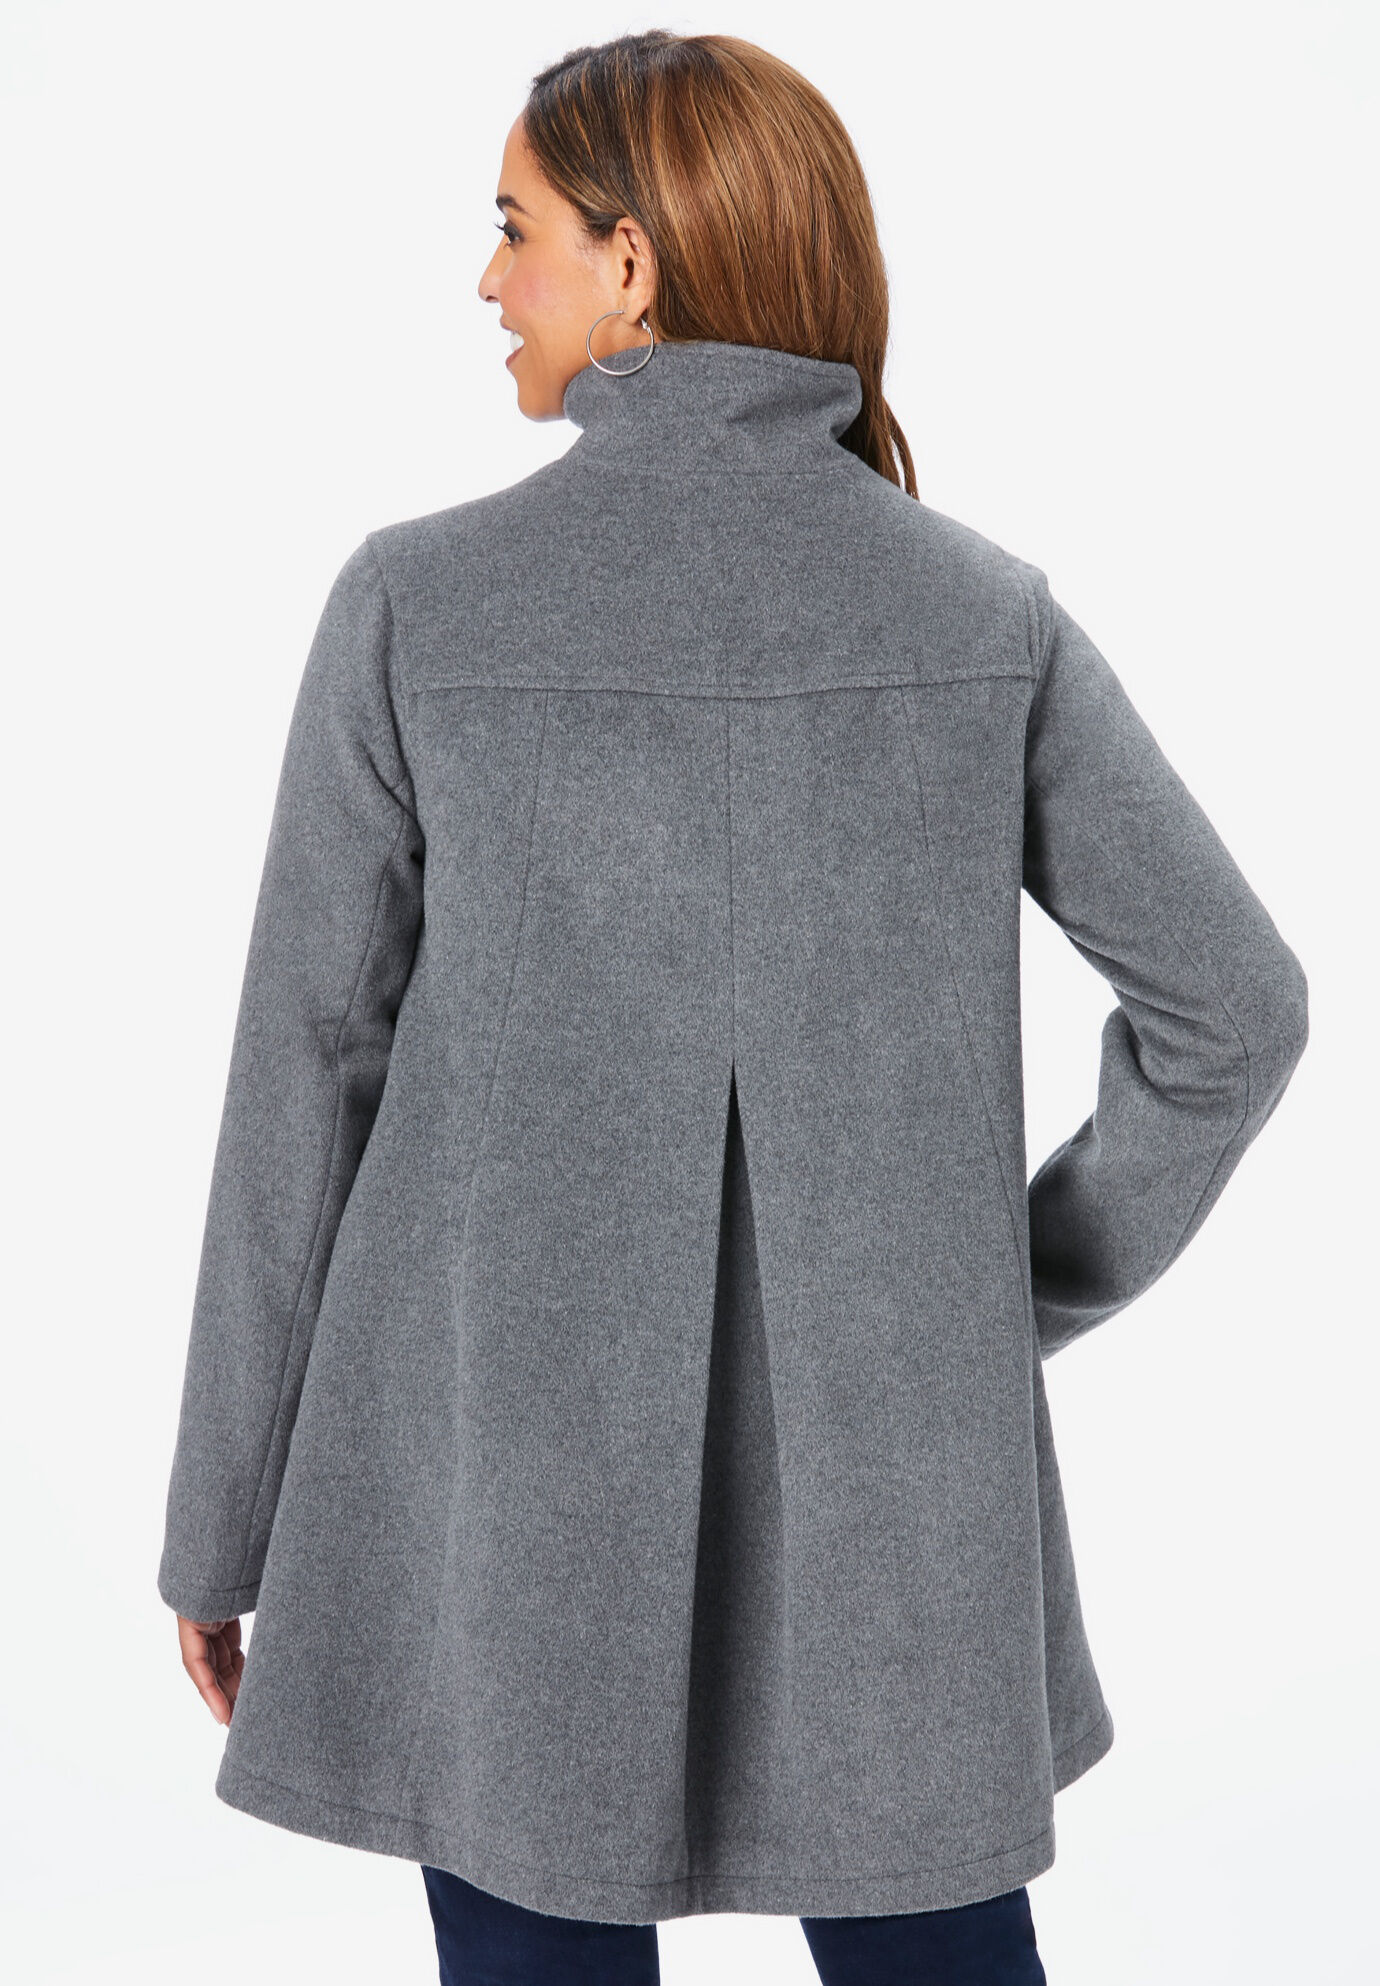 Cozy Up With These Coats and Layering Options from fullbeauty.com